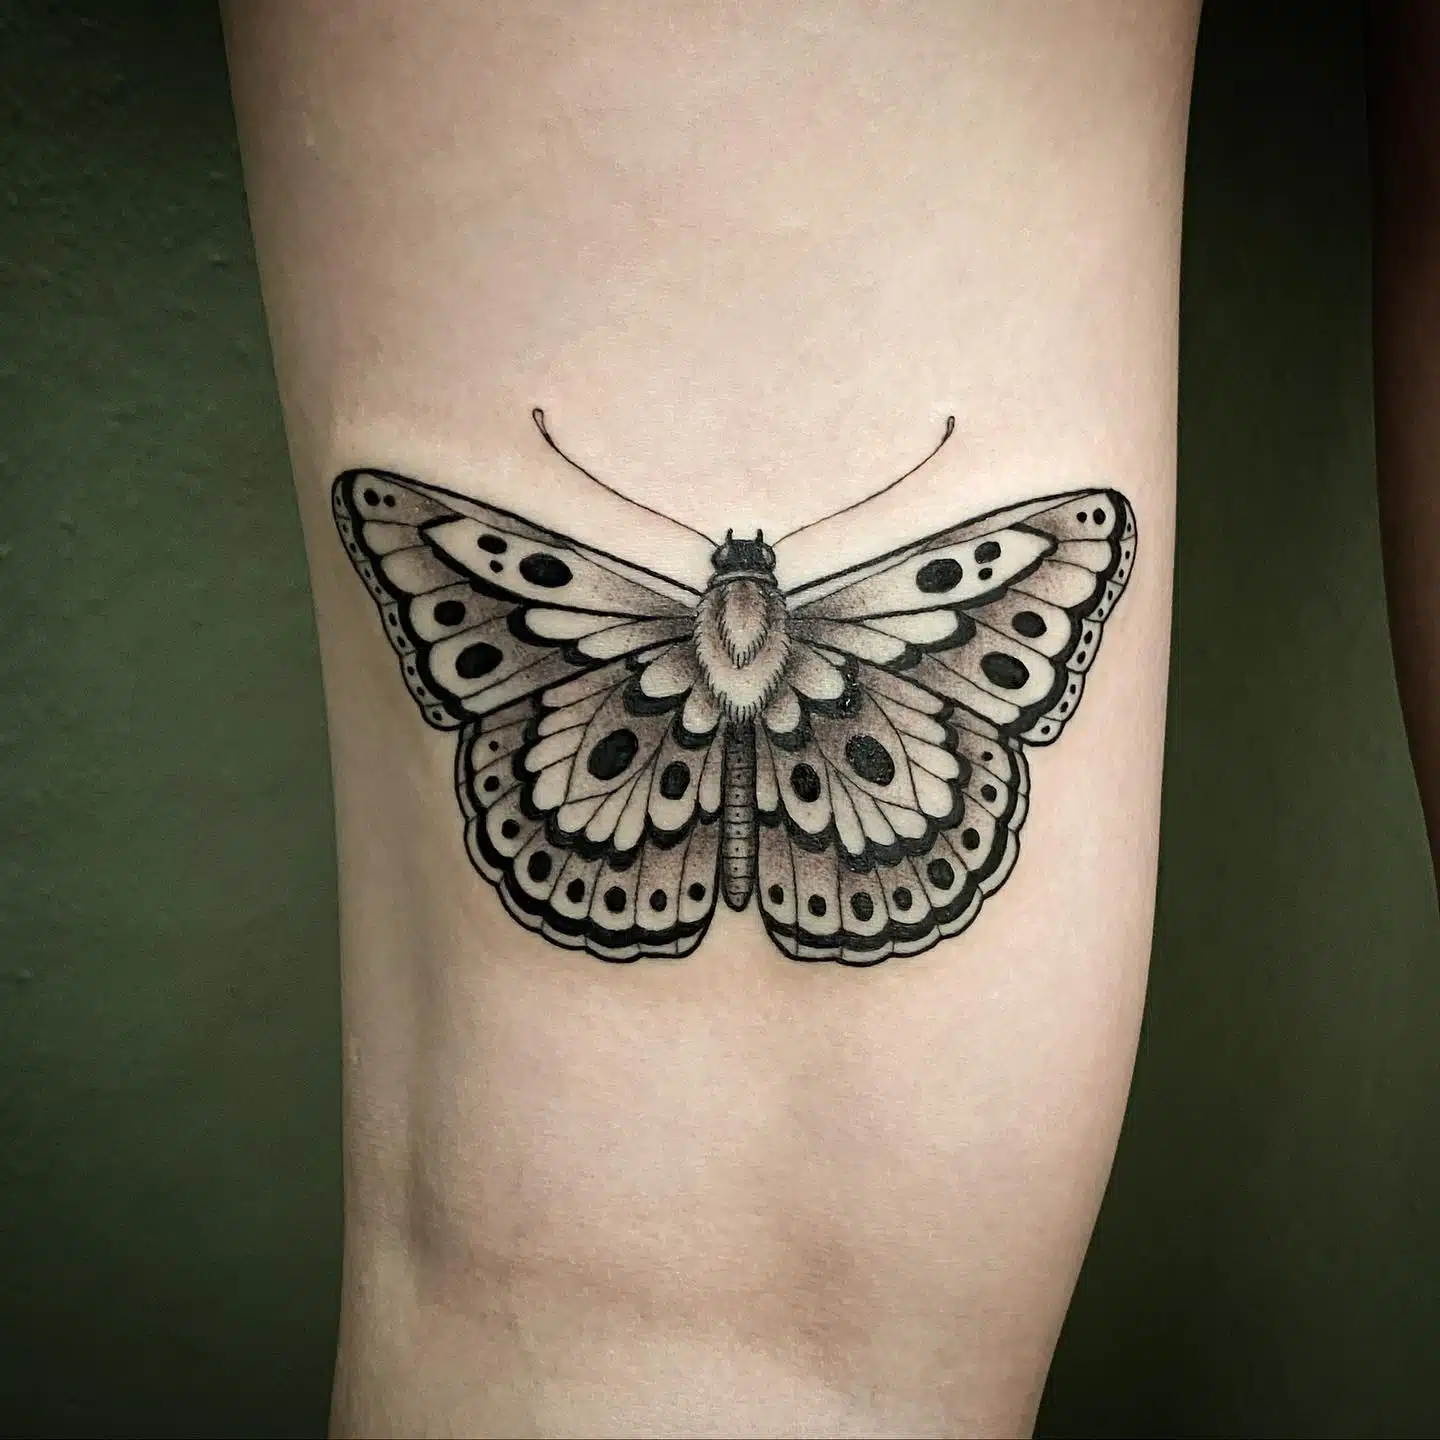 200+ Moth Tattoo Ideas & Meanings To Help Begin A New Life!